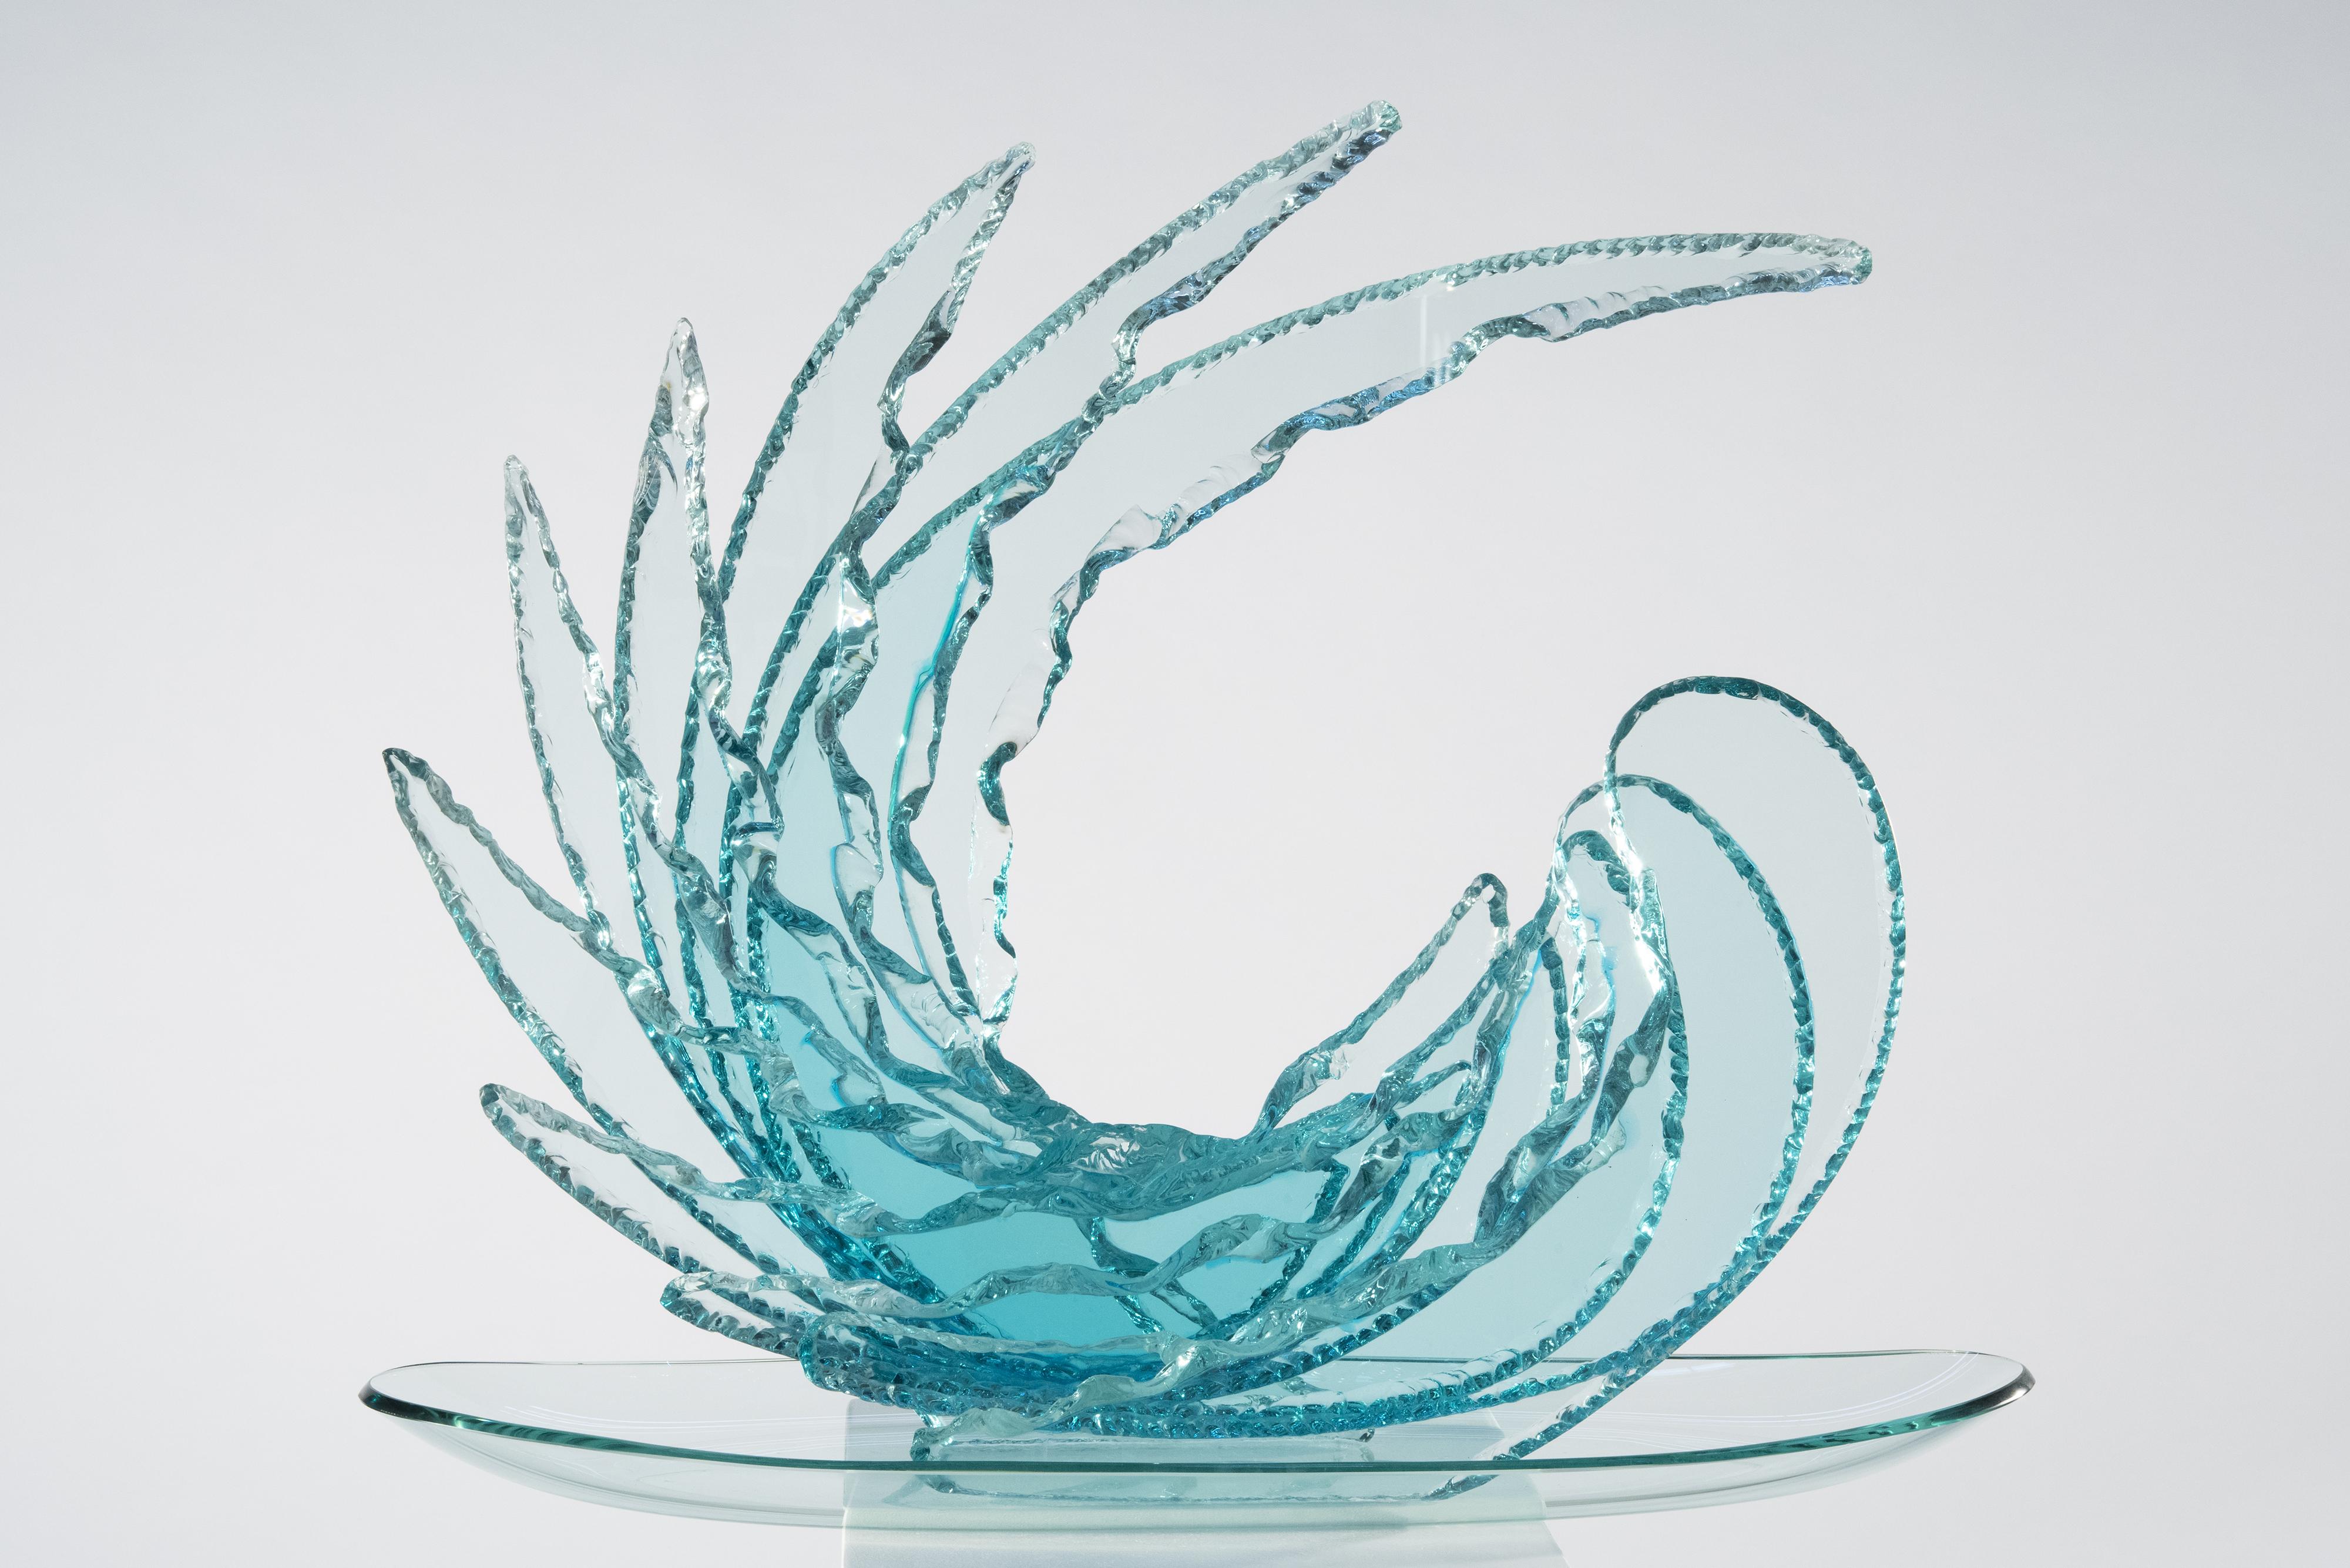 2021 Artistic sculpture of crystal of maximum artisanal qualty signed Ghirò Studio (Milan, Italy).

Innovative design, fine craftmanship and a strong artistic sense make this sculpture not only a creation of incredible charm and elegance but a very